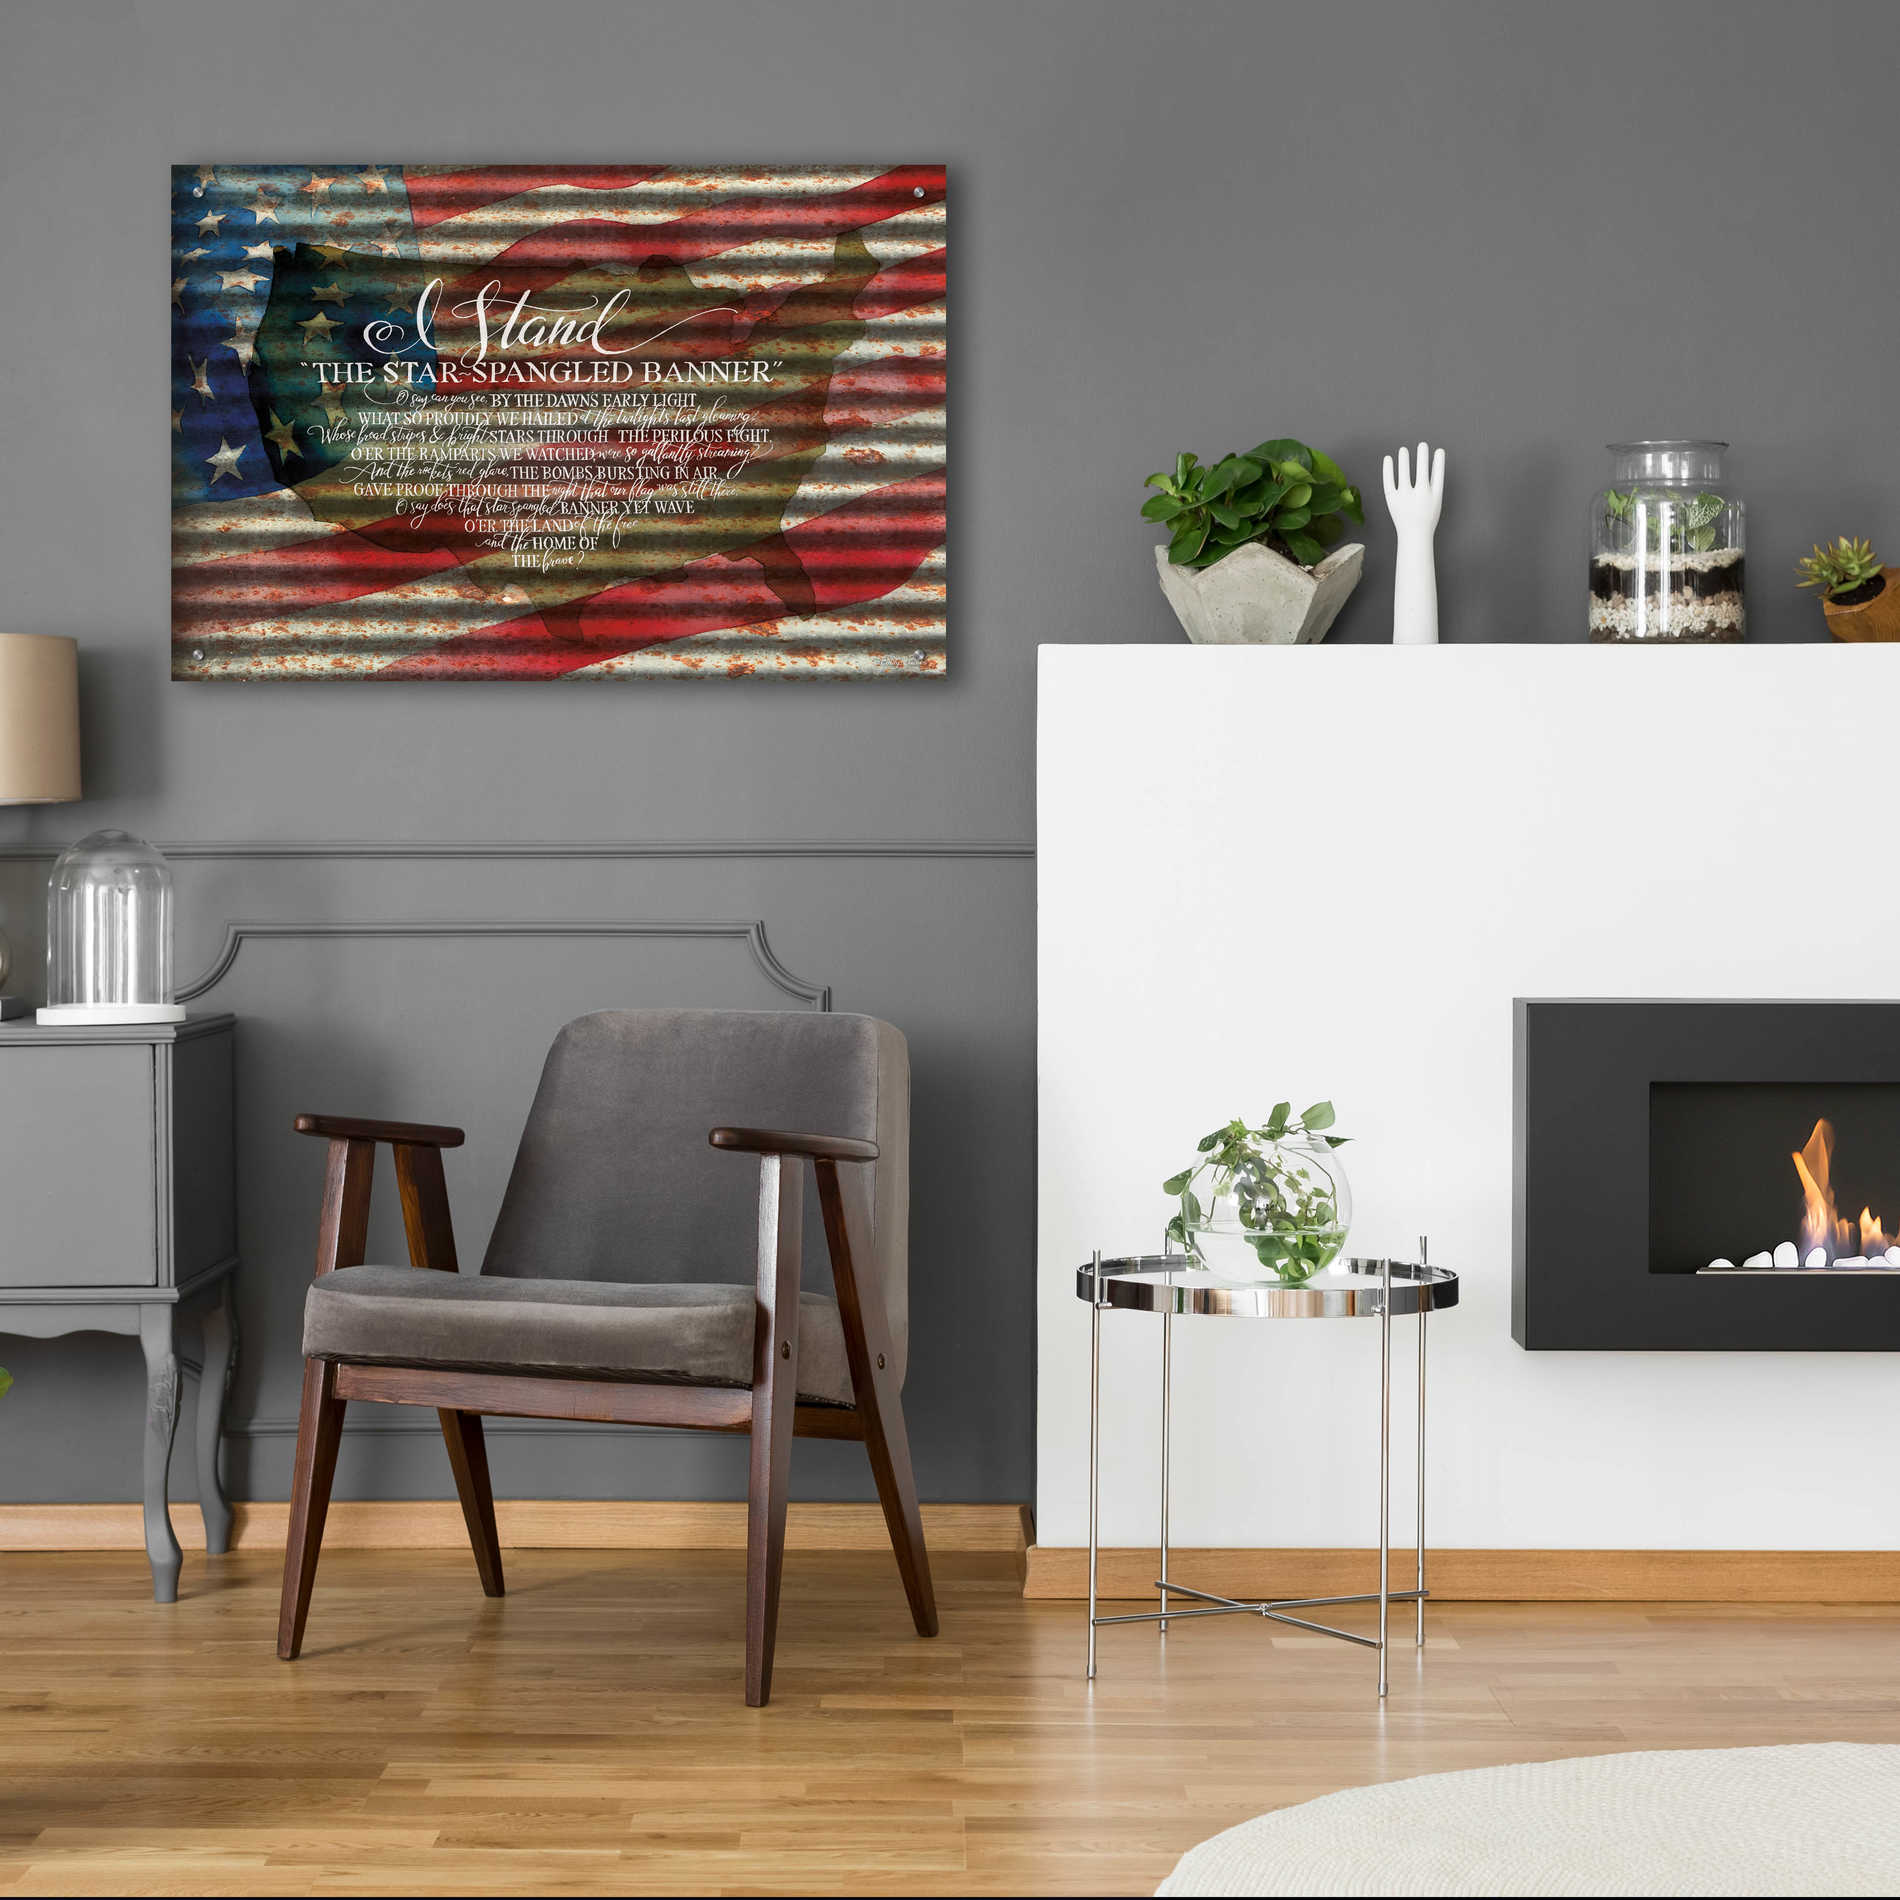 Epic Art 'I Stand American Flag on Metal' by Cindy Jacobs, Acrylic Glass Wall Art,36x24